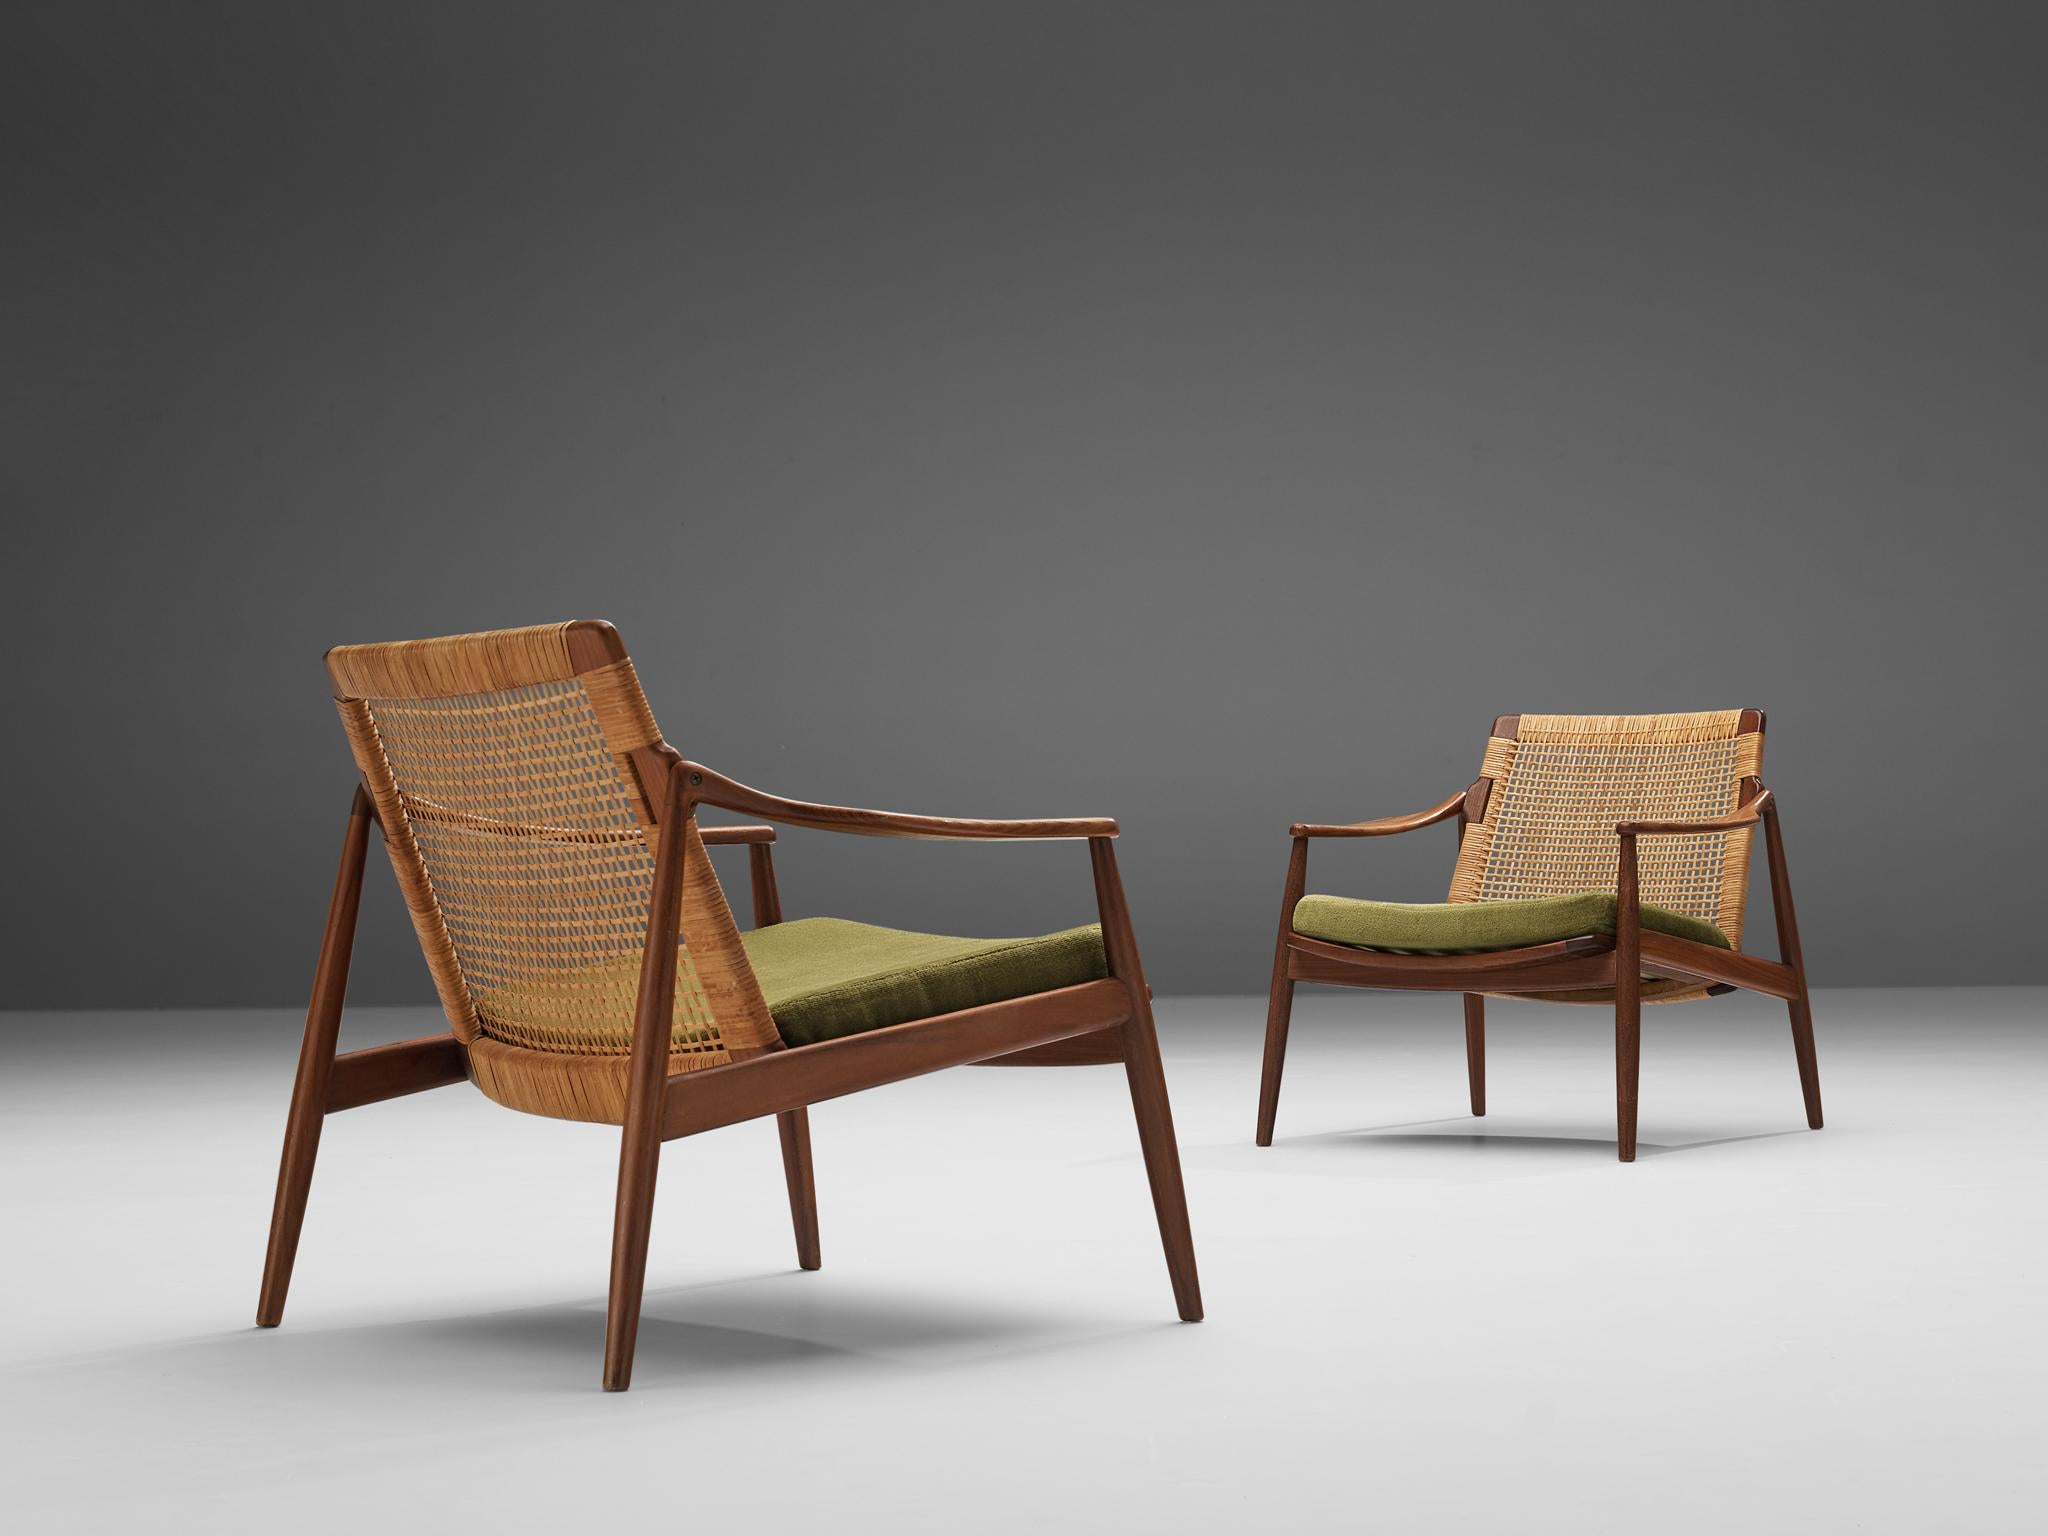 Hartmut Lohmeyer for Wilkhahn, pair of lounge chairs, teak, cane, green colored upholstery, Germany, 1962

This low reclining lounge chair by Hartmut Lohmeyer is organically shaped. The wide open teak frame features a slightly tilted back made out